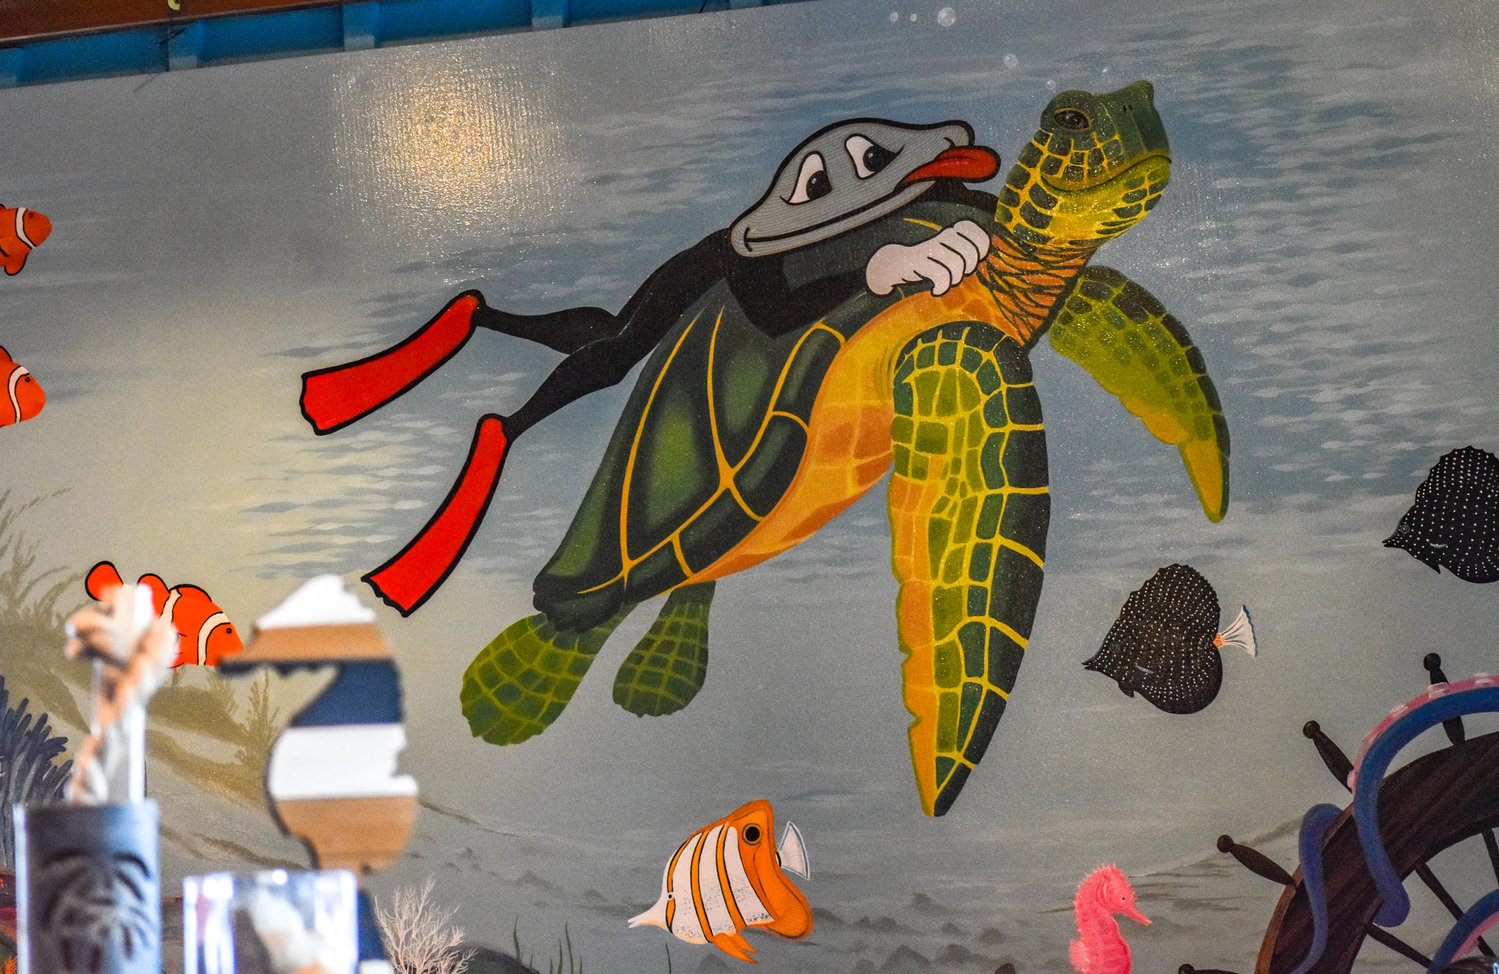 A mural inside the Crazy Clam in Sylvan Beach features the restaurant's iconic clam mascot